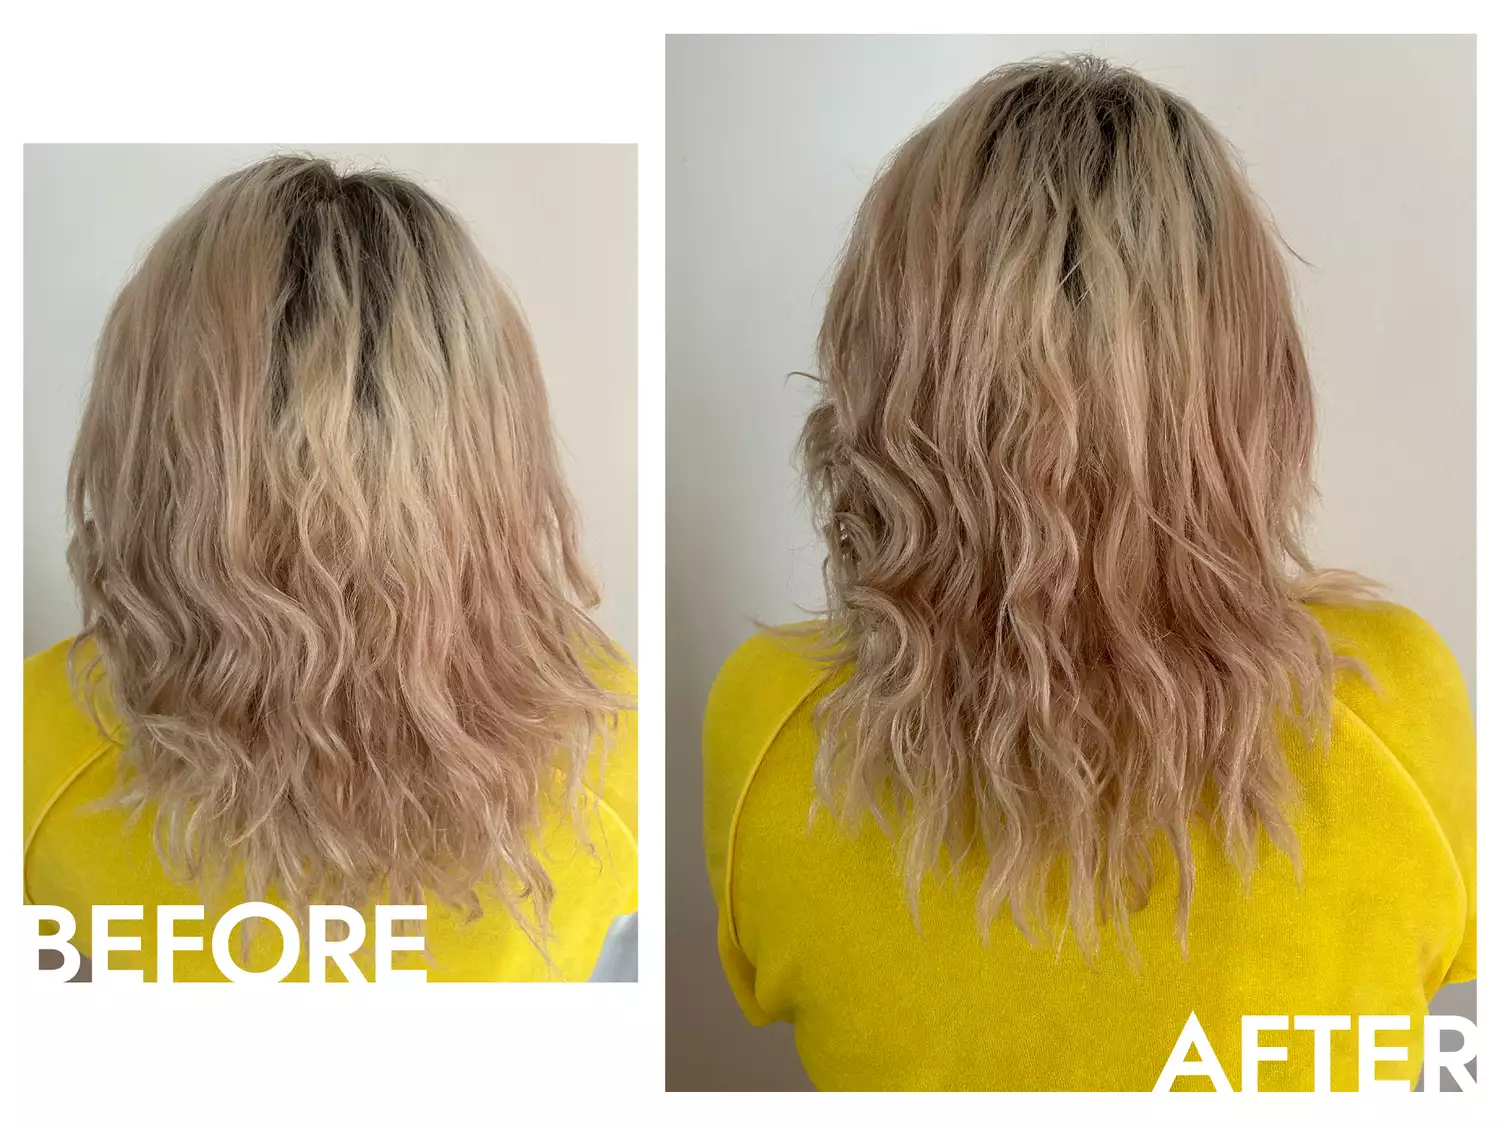 K18 Molecular Hair Oil before and after photos 